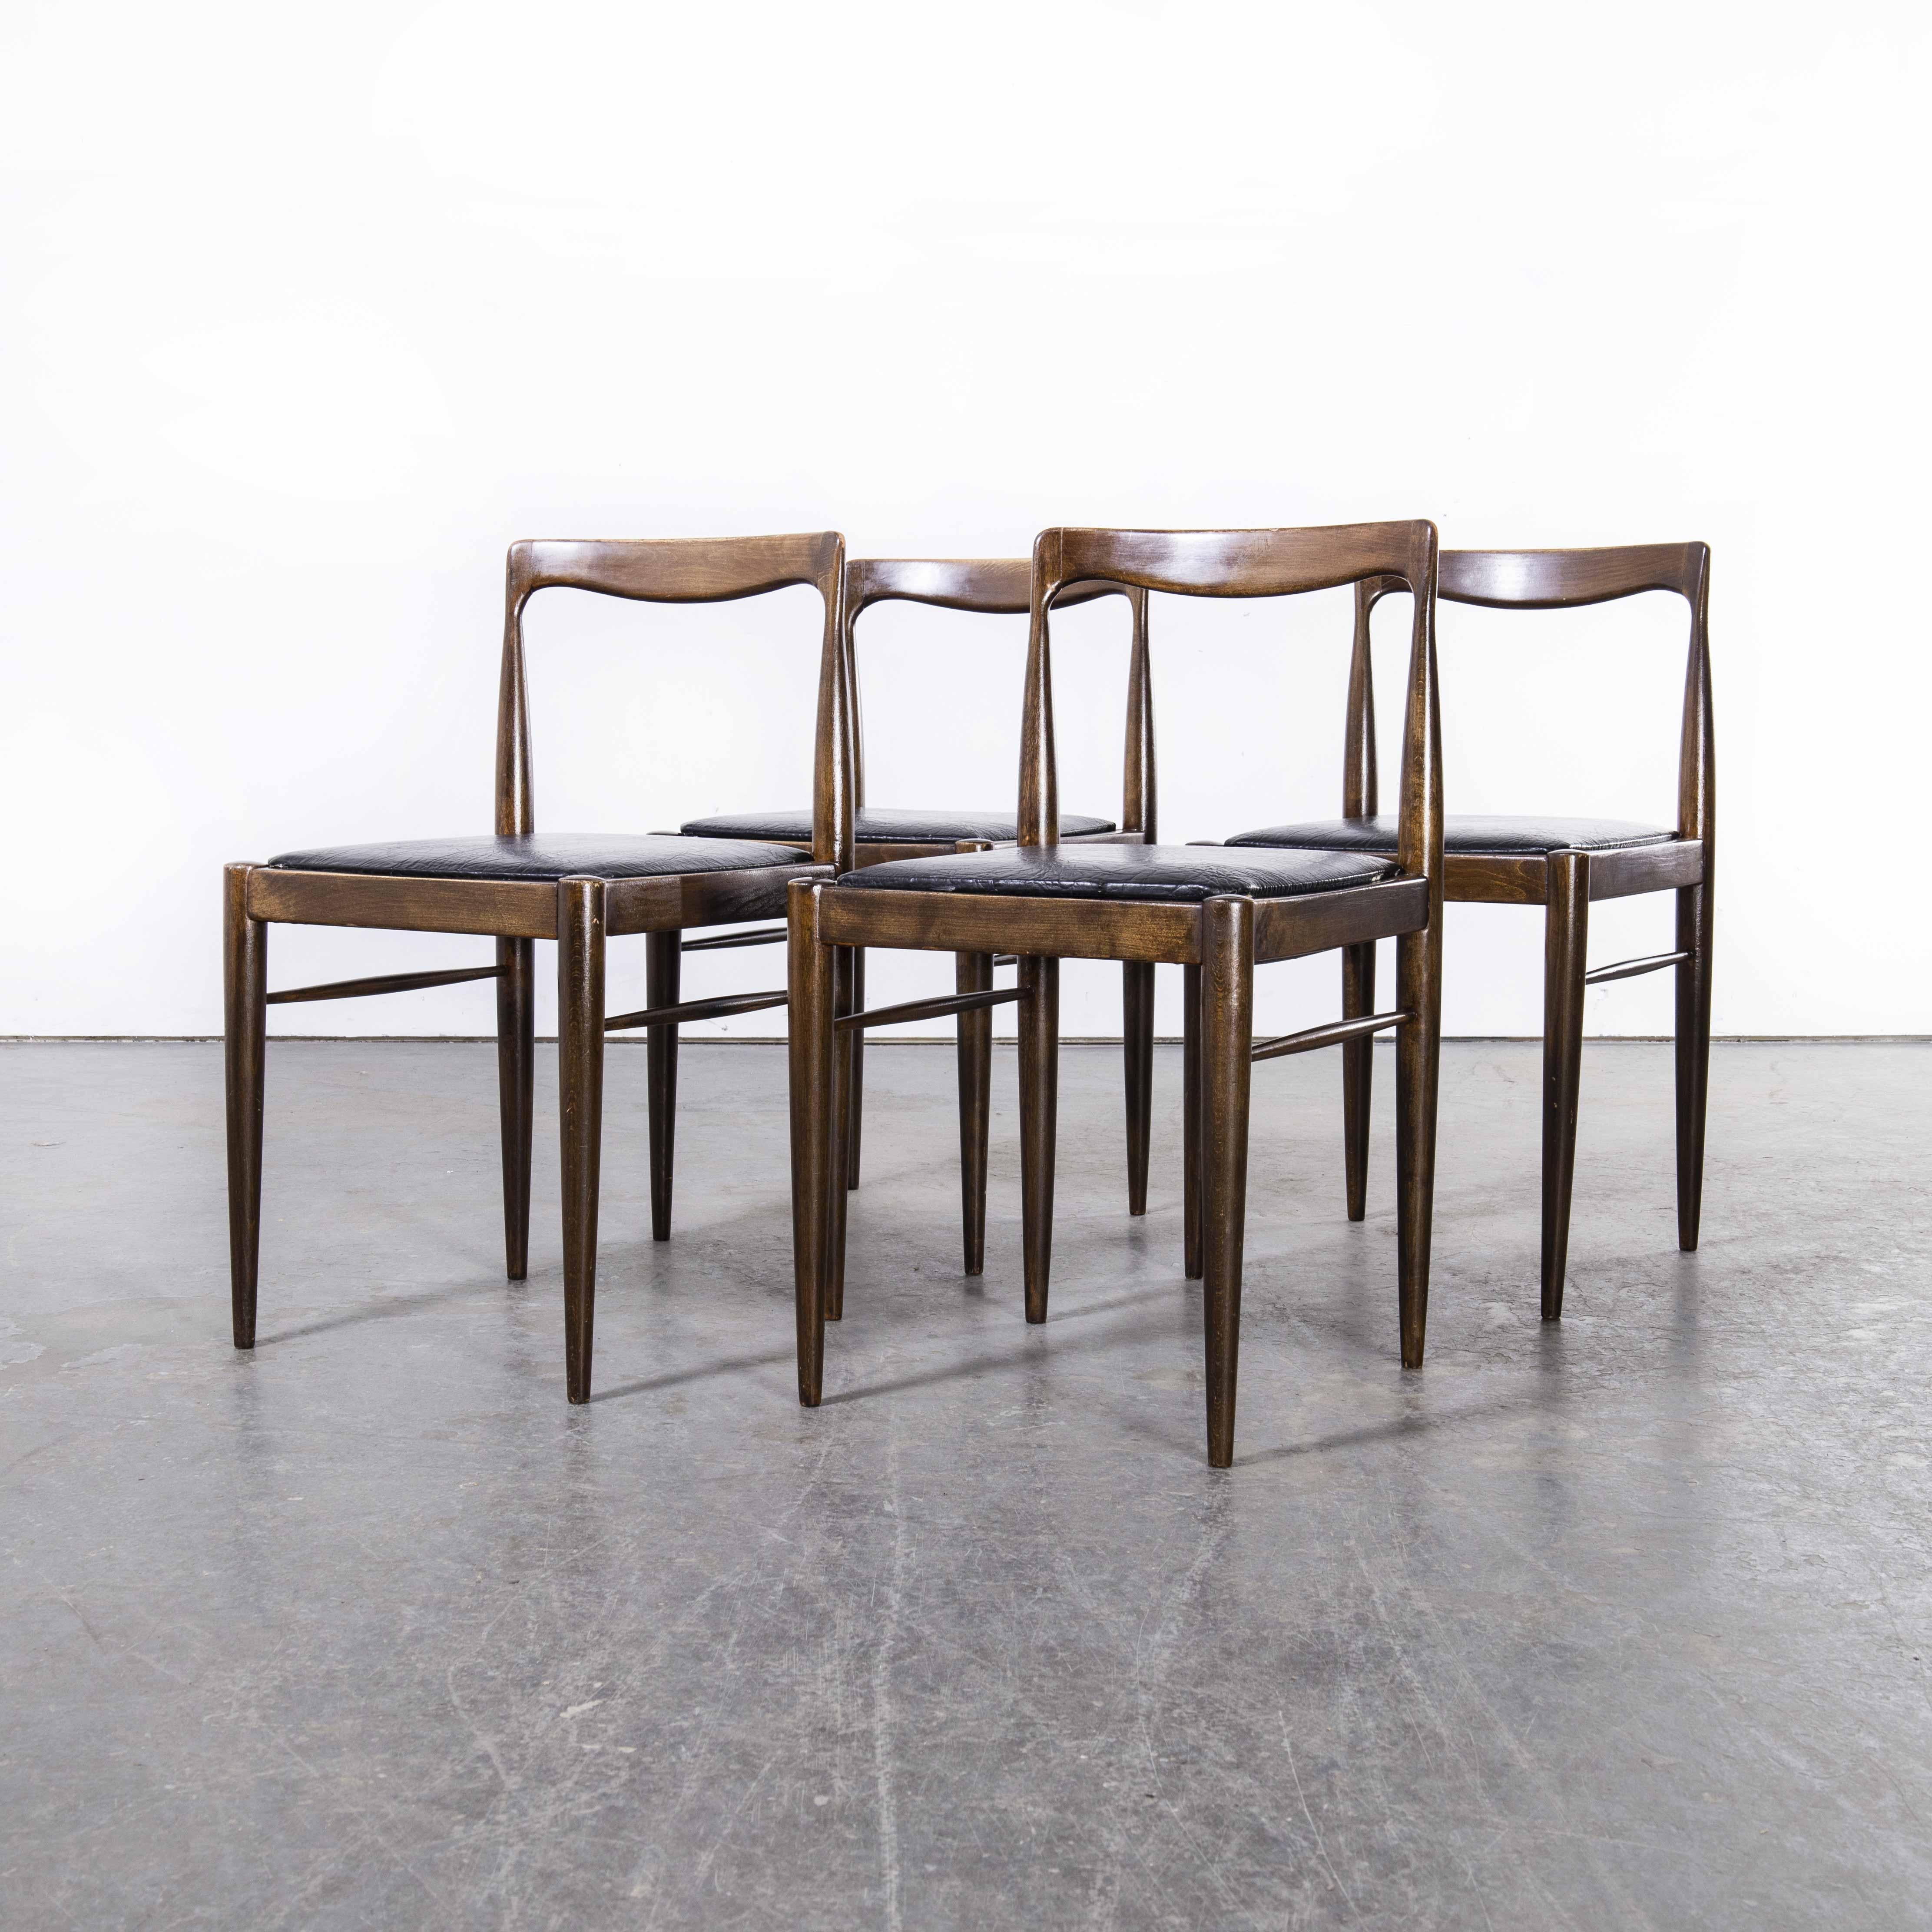 1950’s mid century dark teak dining chairs – set of four
1950’s mid century dark teak dining chairs – set of four. Stunningly simple design produced in the Czech republic. Czech was one of the largest producers of high quality mid century furniture